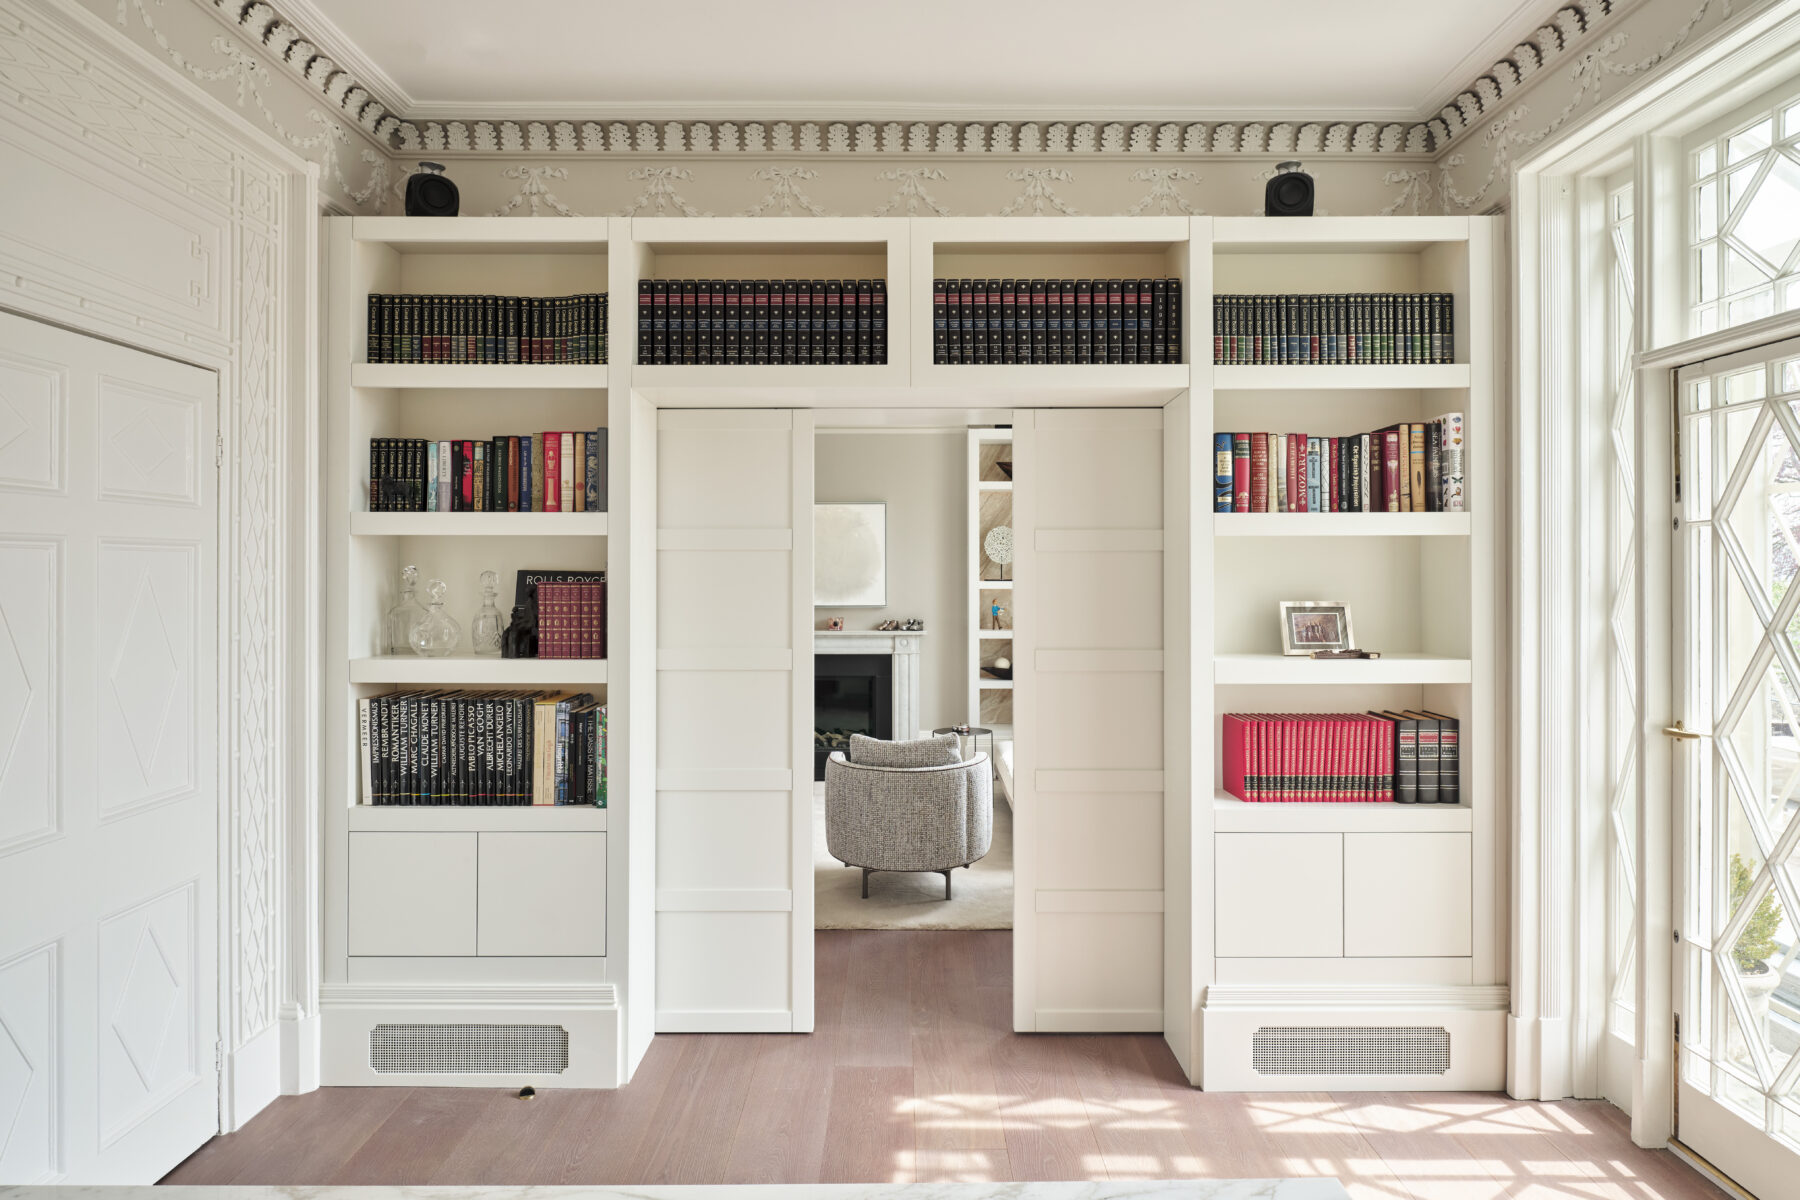 Bath Bespoke_up and over bookcases